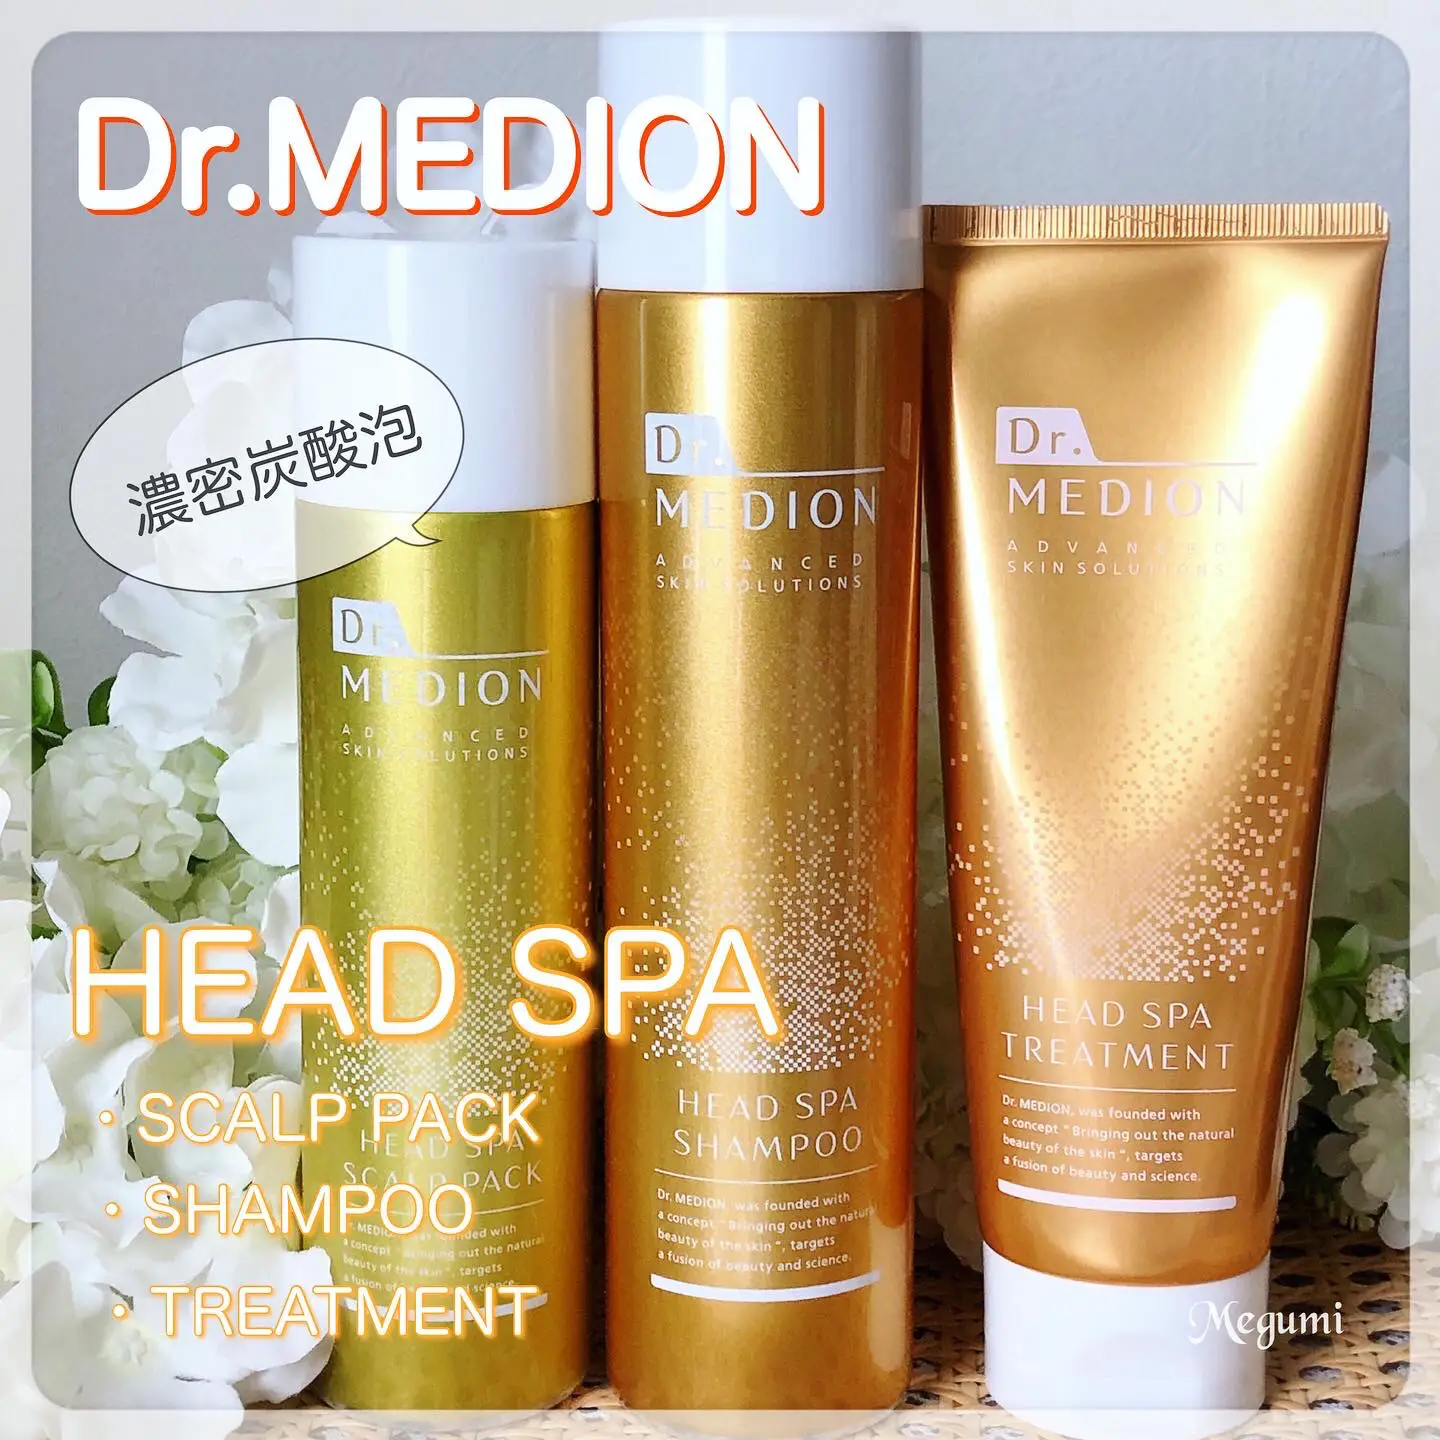 Head spa with carbonated foam! Dr. Medion's head spa ♪ | Gallery